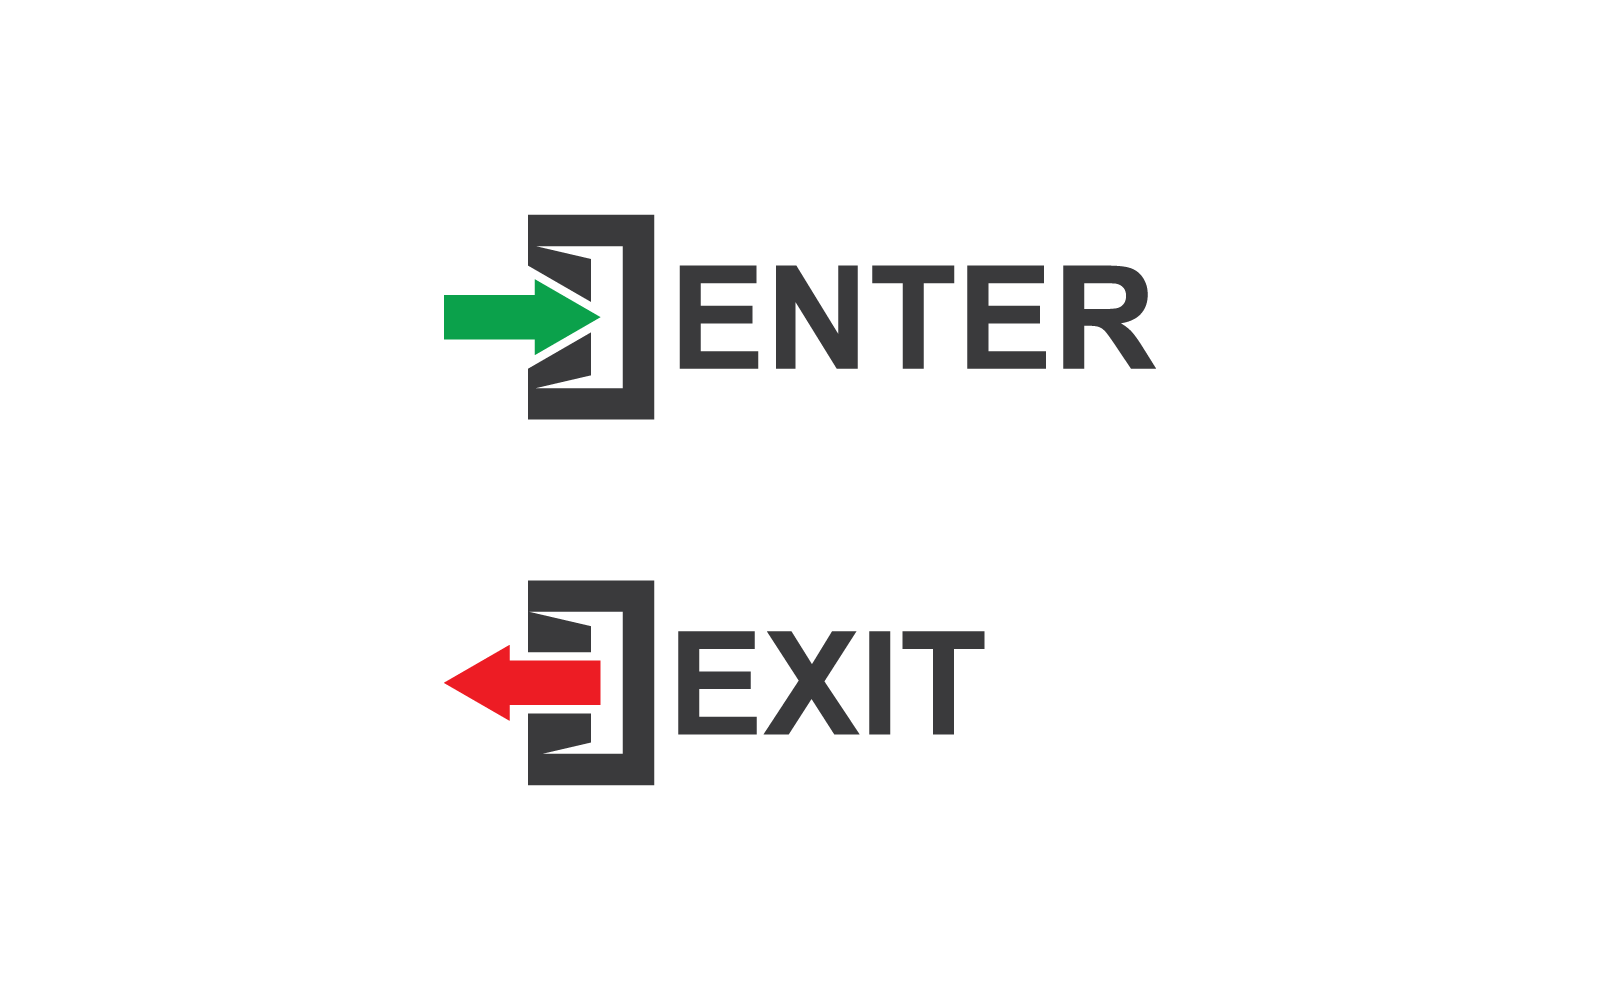 Enter and exit icon vector flat design